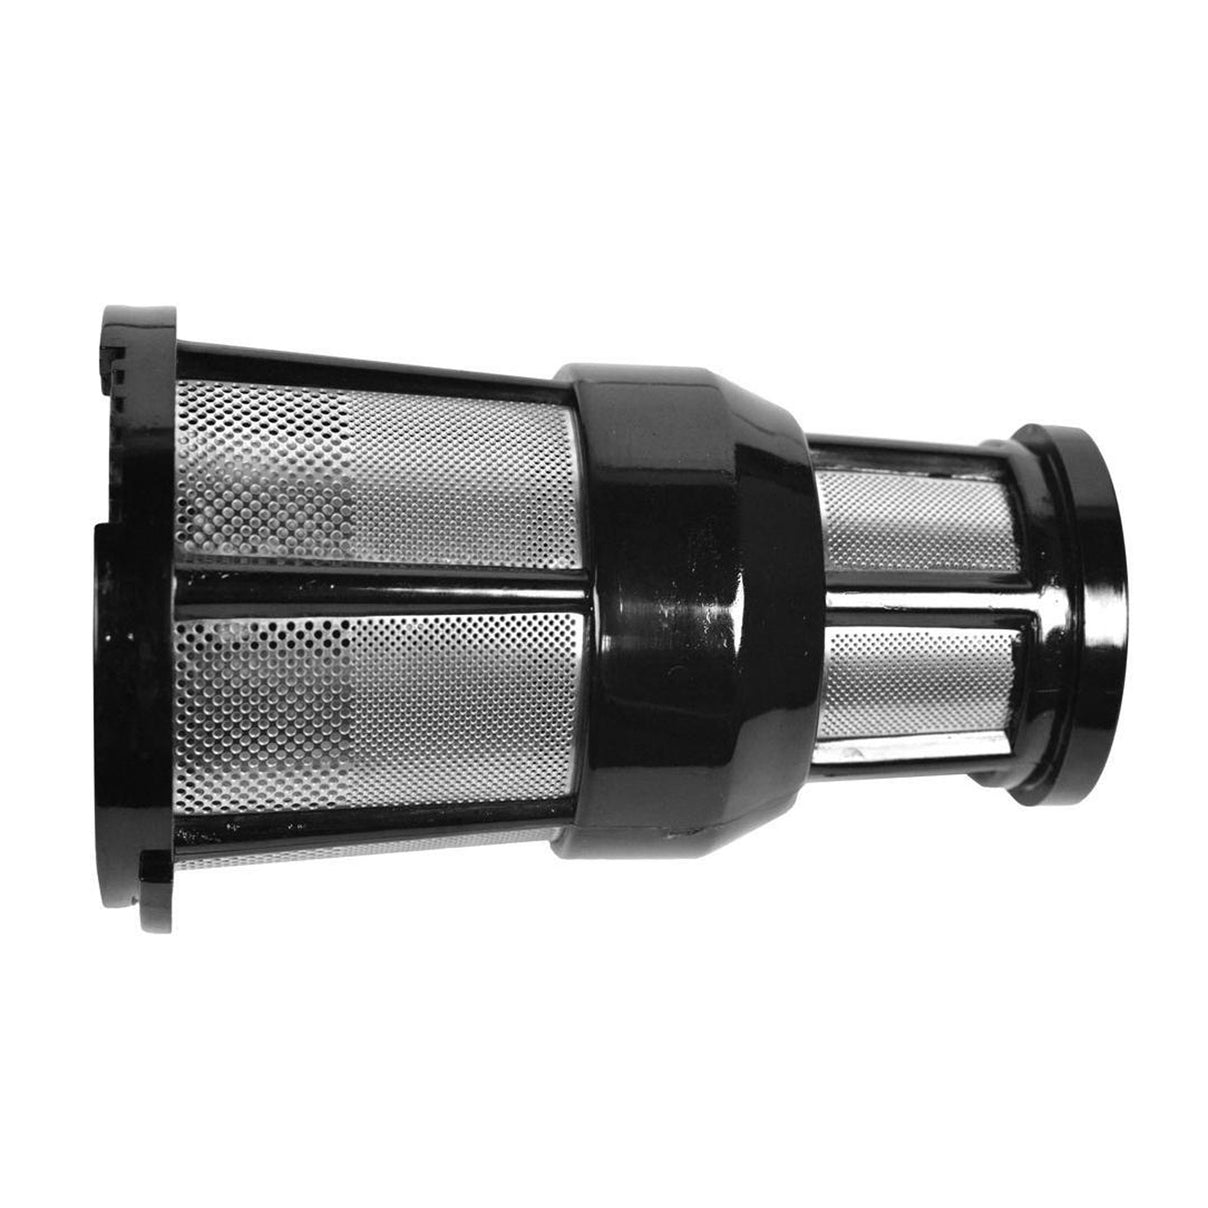 Stainless steel juicing screen for the Solostar® 4. It is made with BPA-free Ultem plastics for durability.